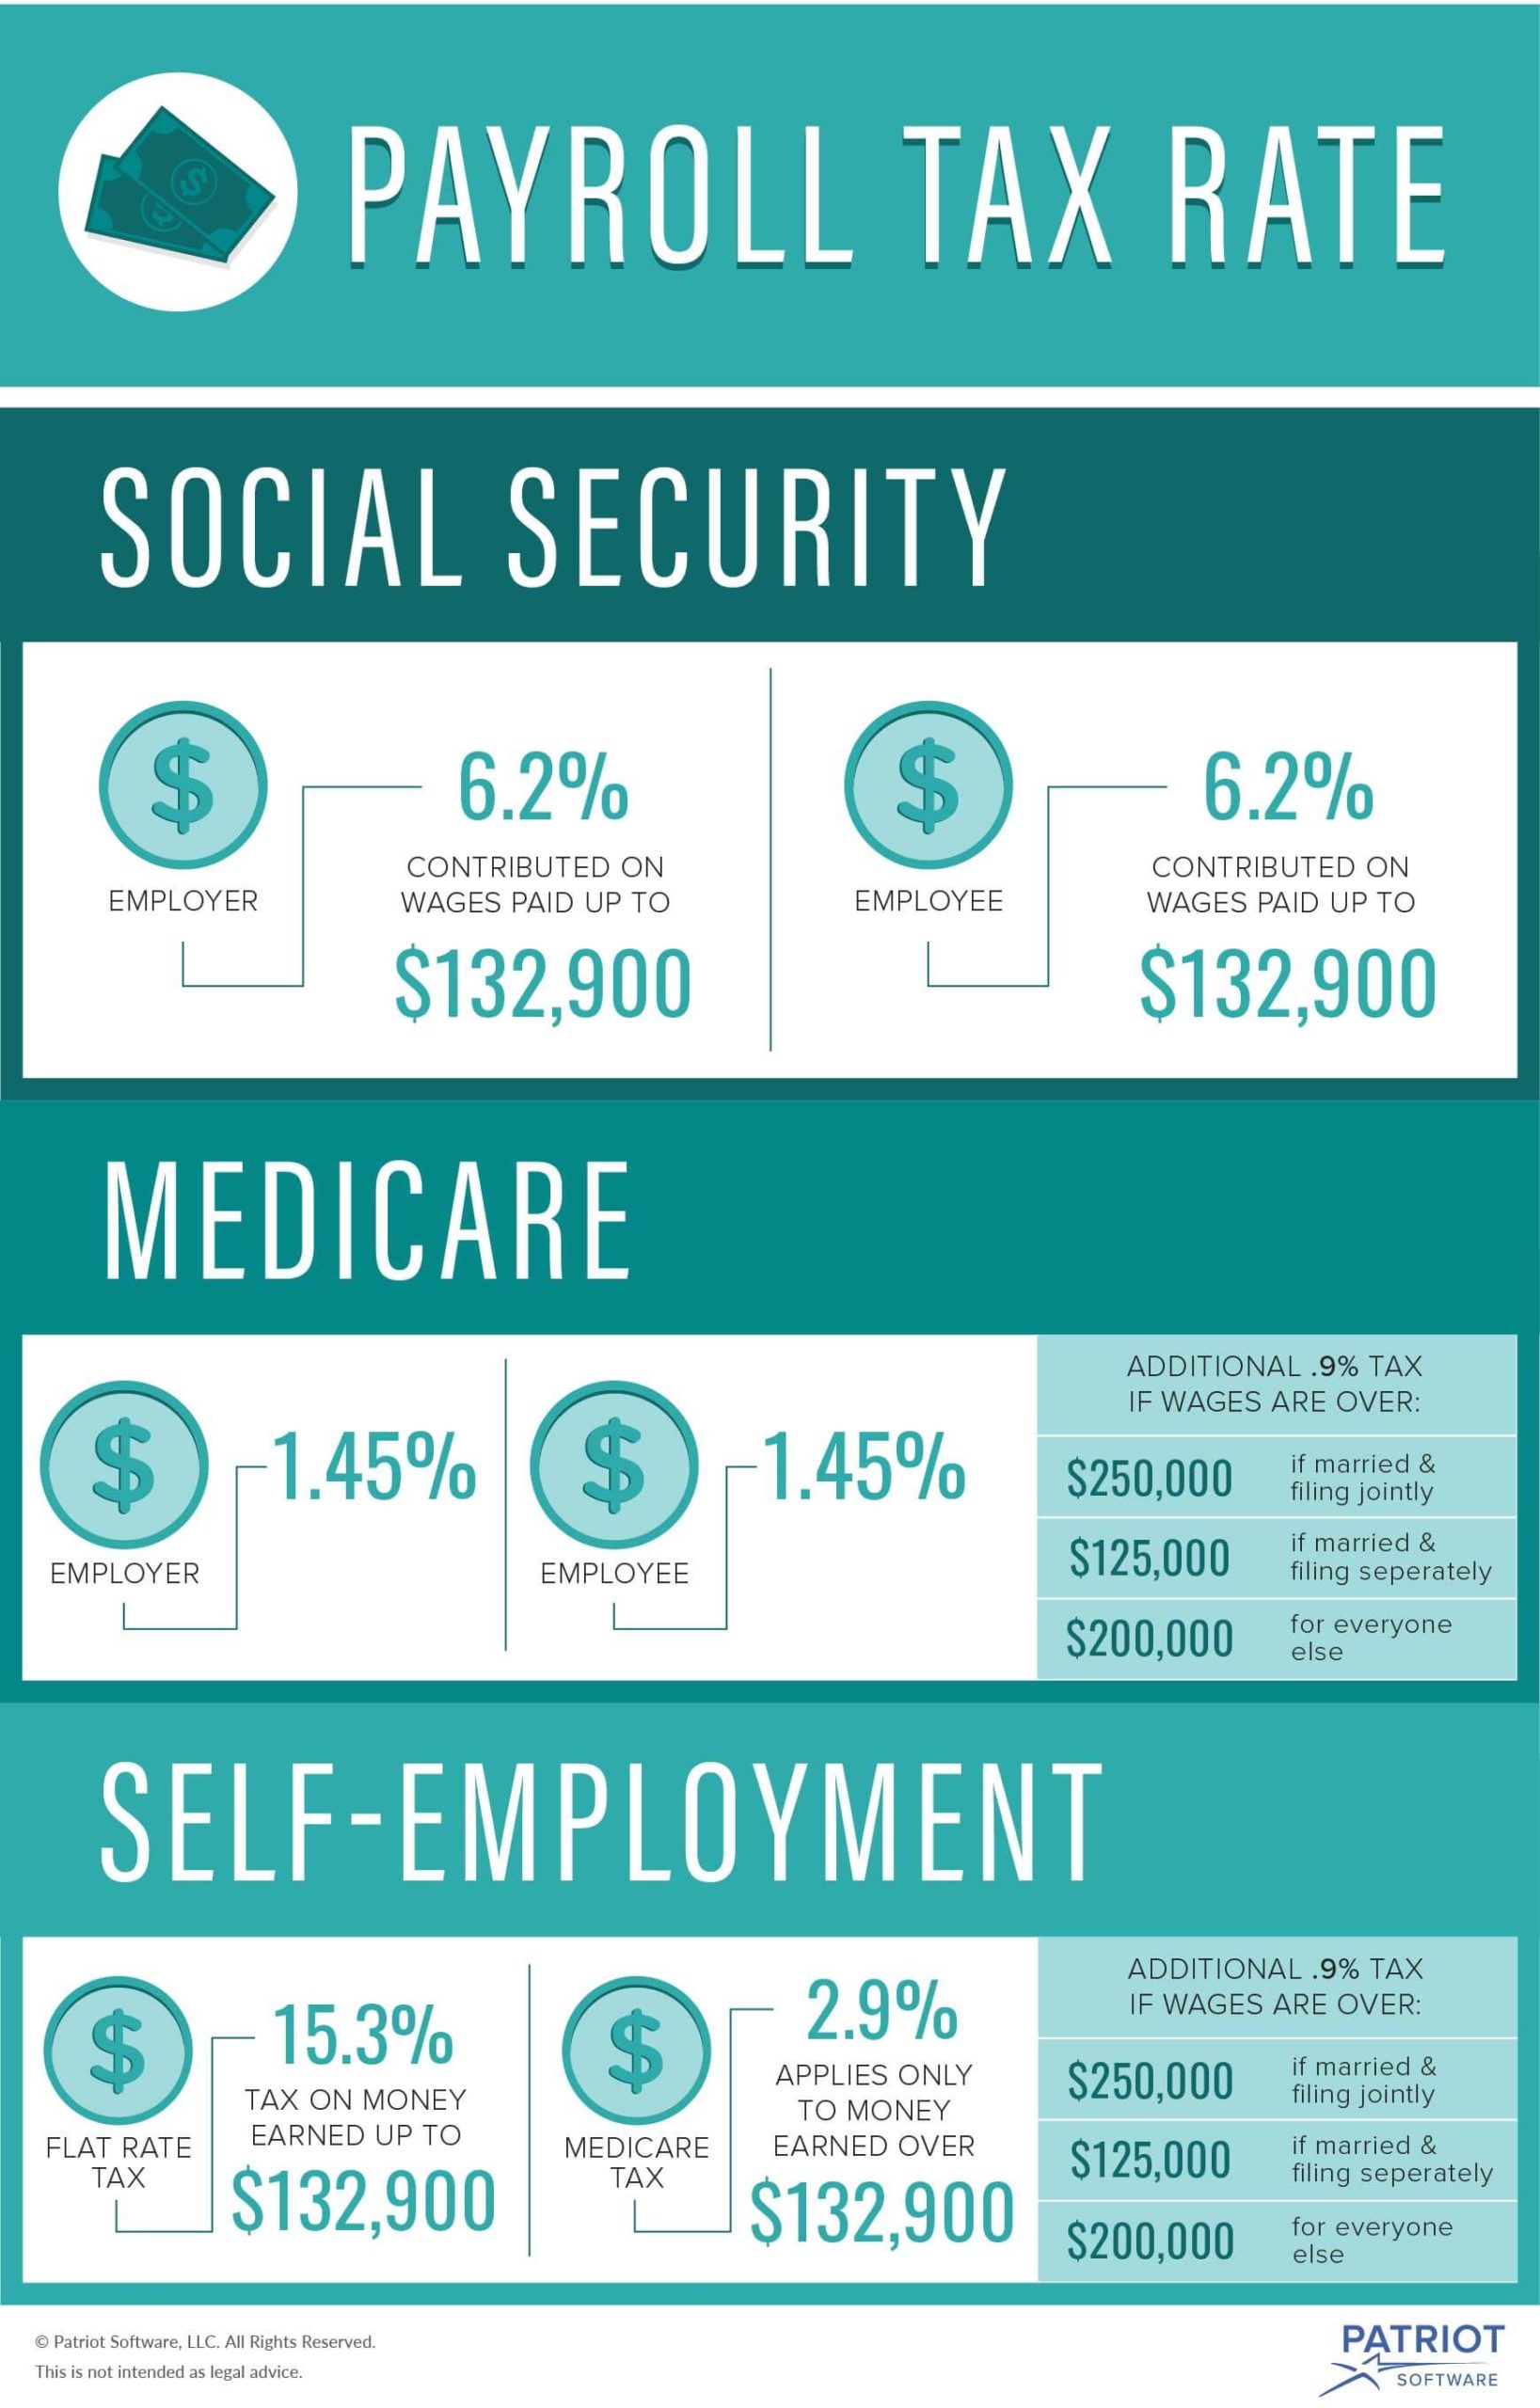 What Is The Social Security And Medicare Tax Rate